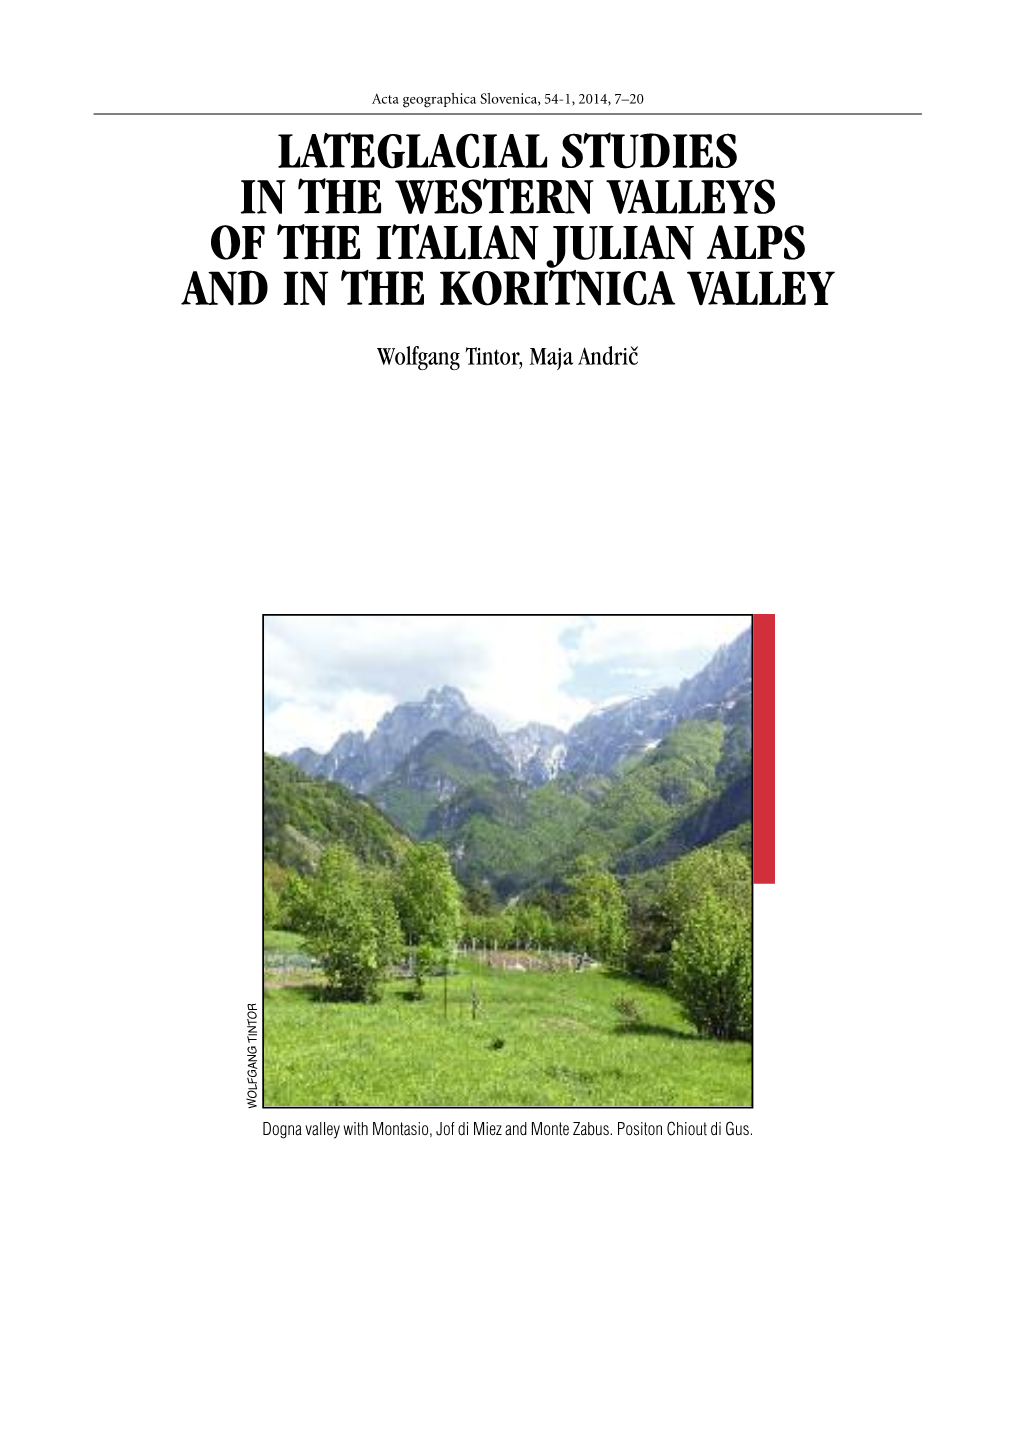 Lateglacial Studies in the Western Valleys of the Italian Julian Alps and in the Koritnica Valley